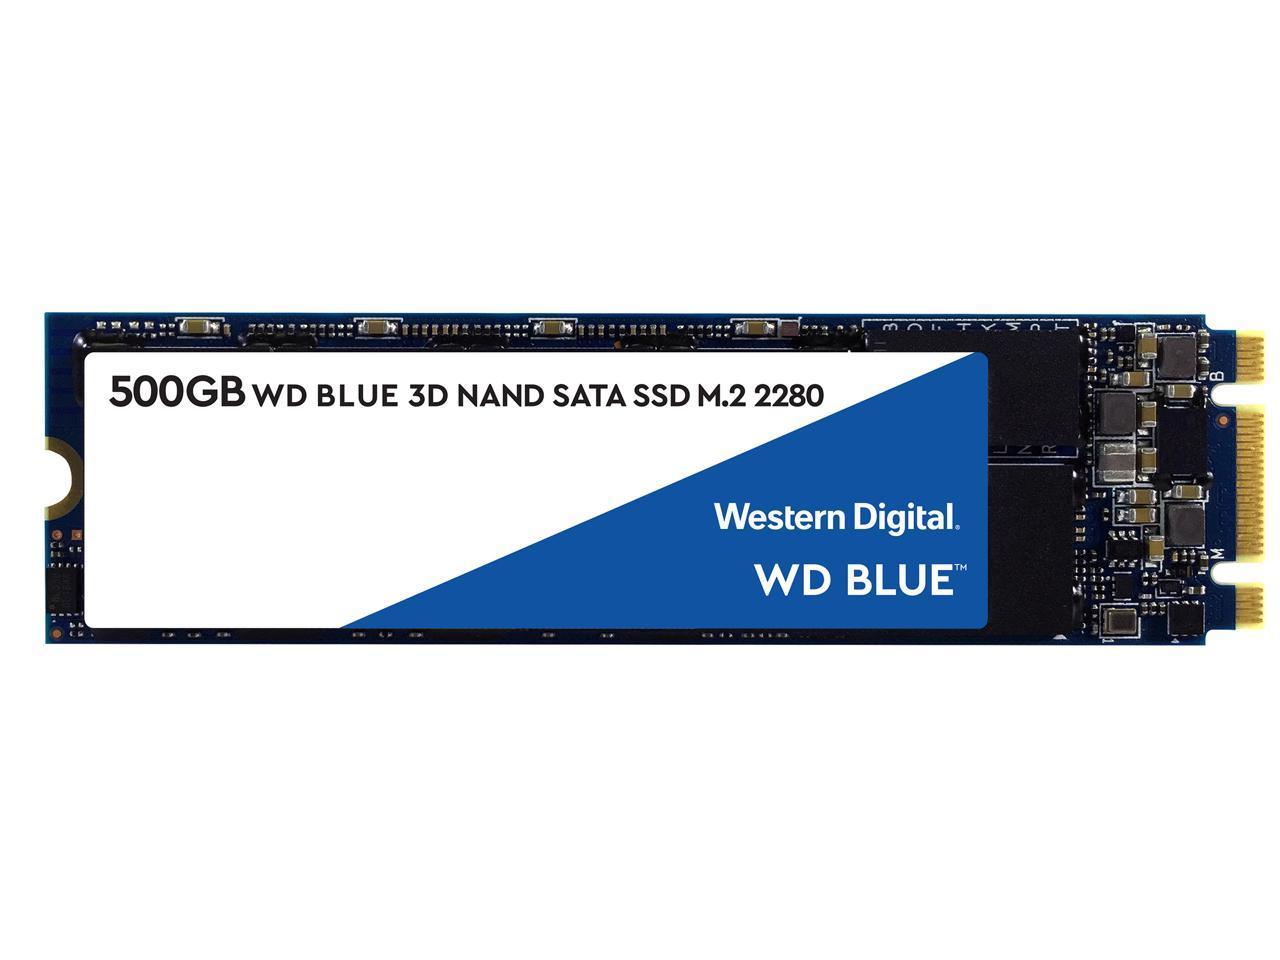 WD Blue M2 2280 500GB SATA III Solid State Drive for $52.99 Shipped